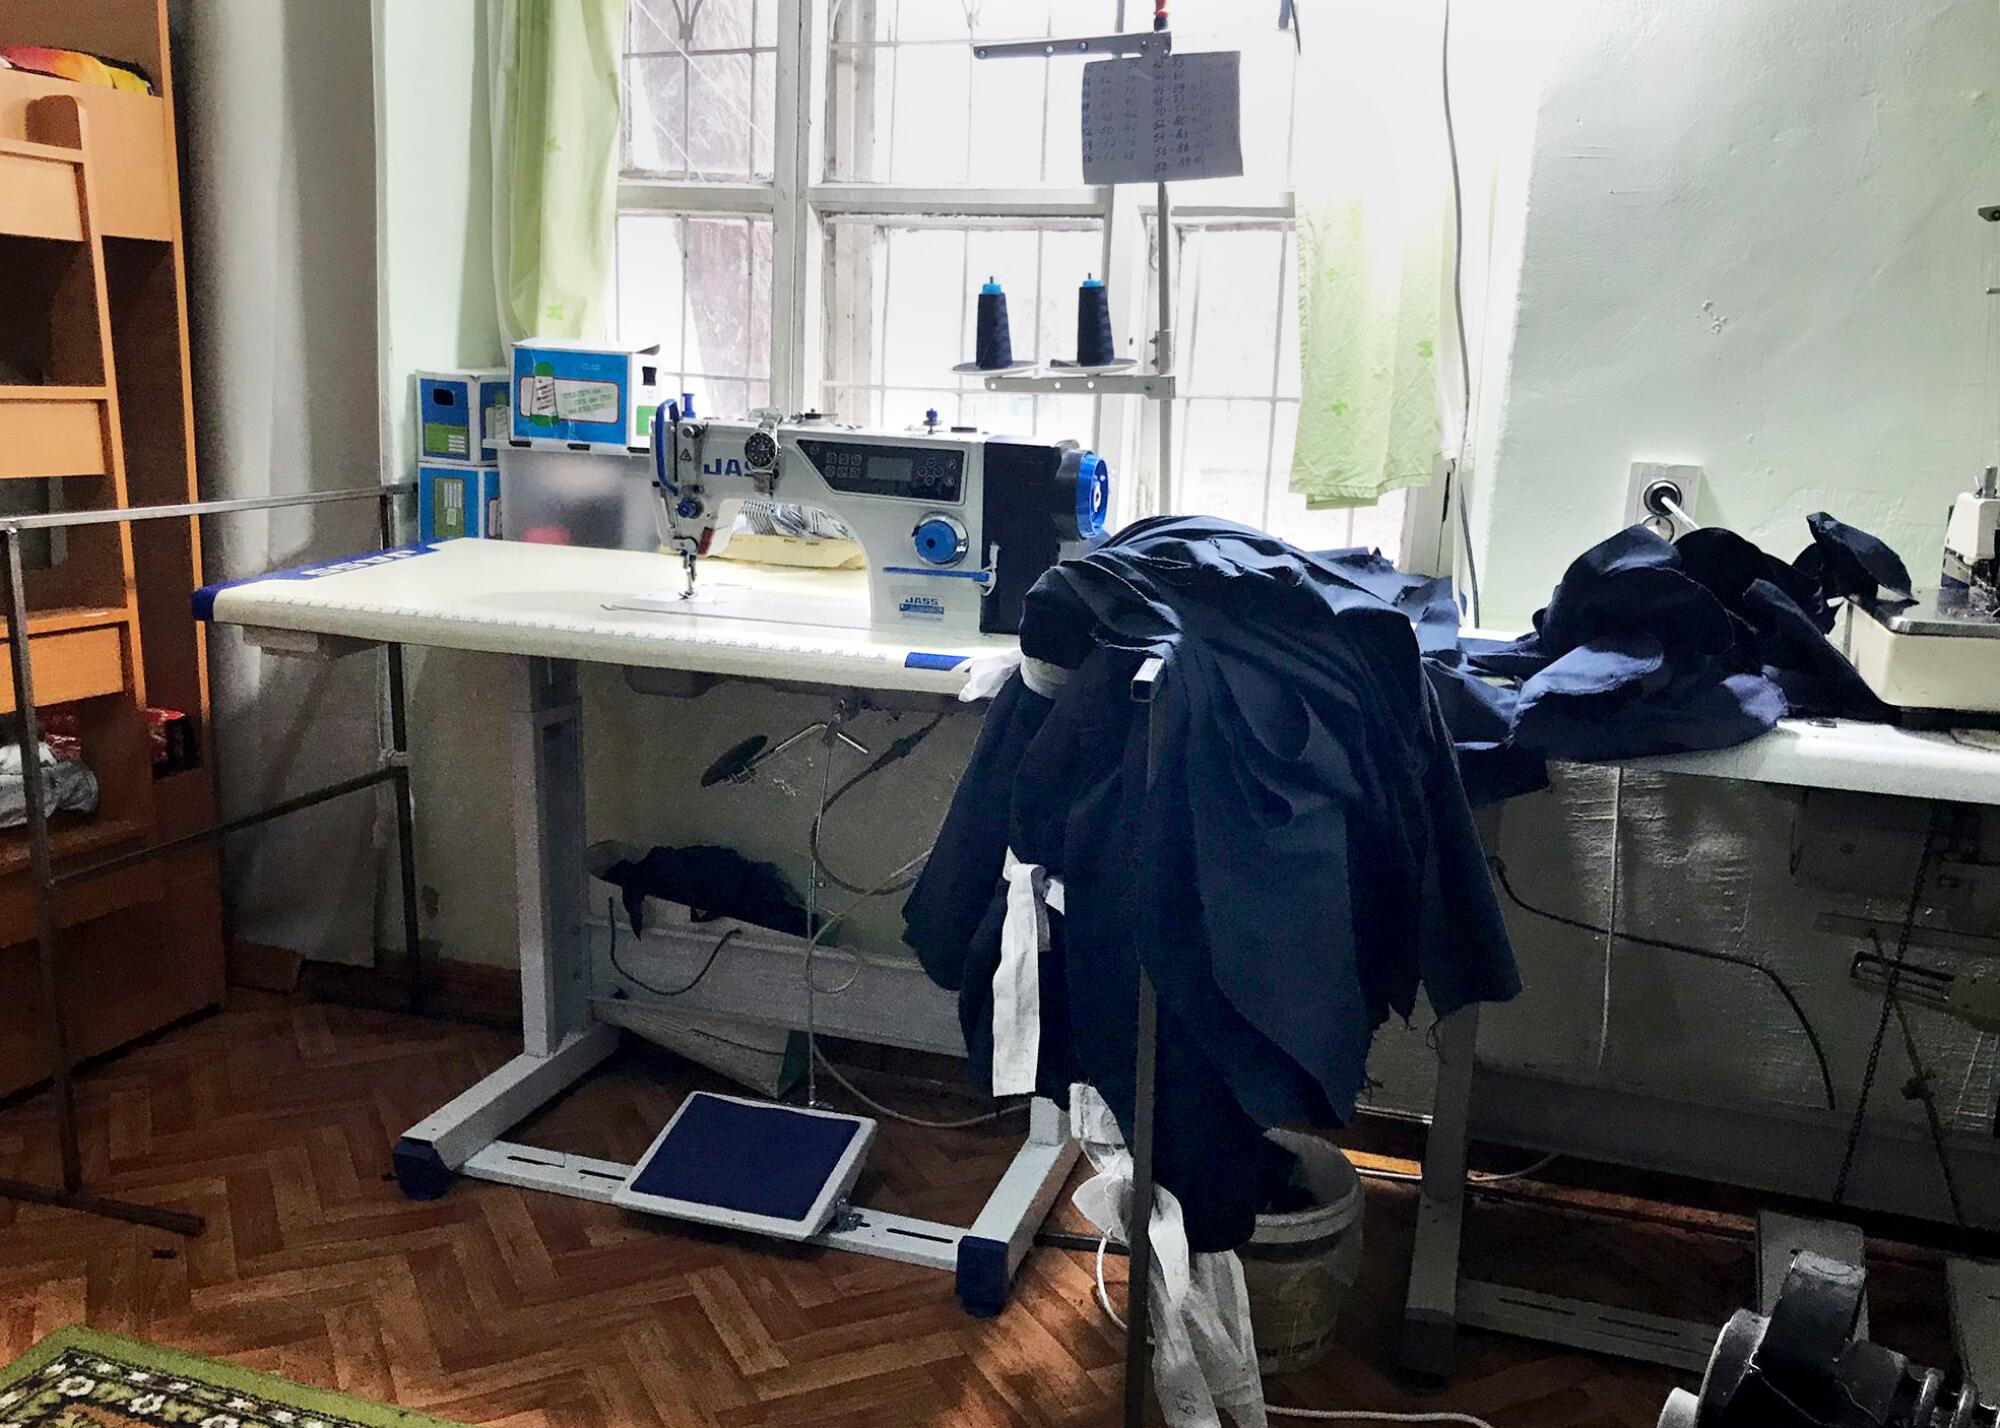 A still life of a sewing machine set up near a window. Nearby is a pile of dark cloth